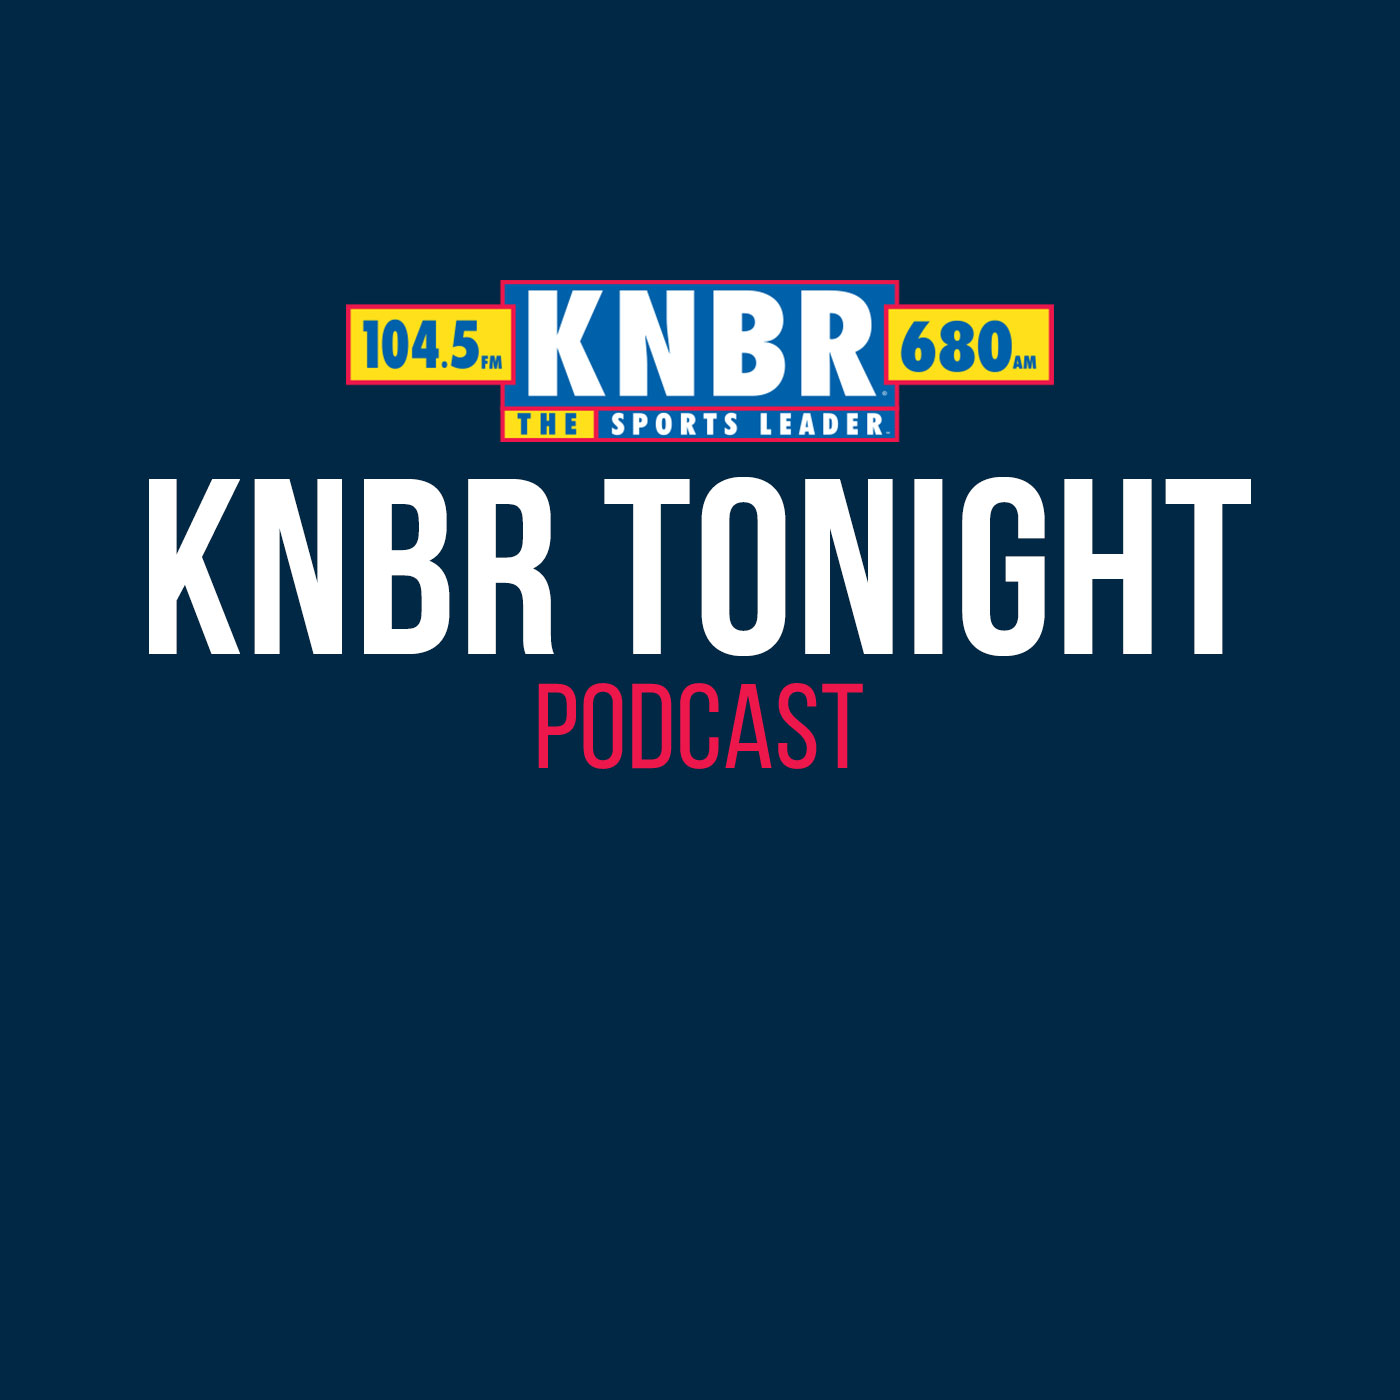 3-31 Danny Emerman joins KNBR Tonight with Kerry to talk about will Farhan get another bat at some point before the season starts